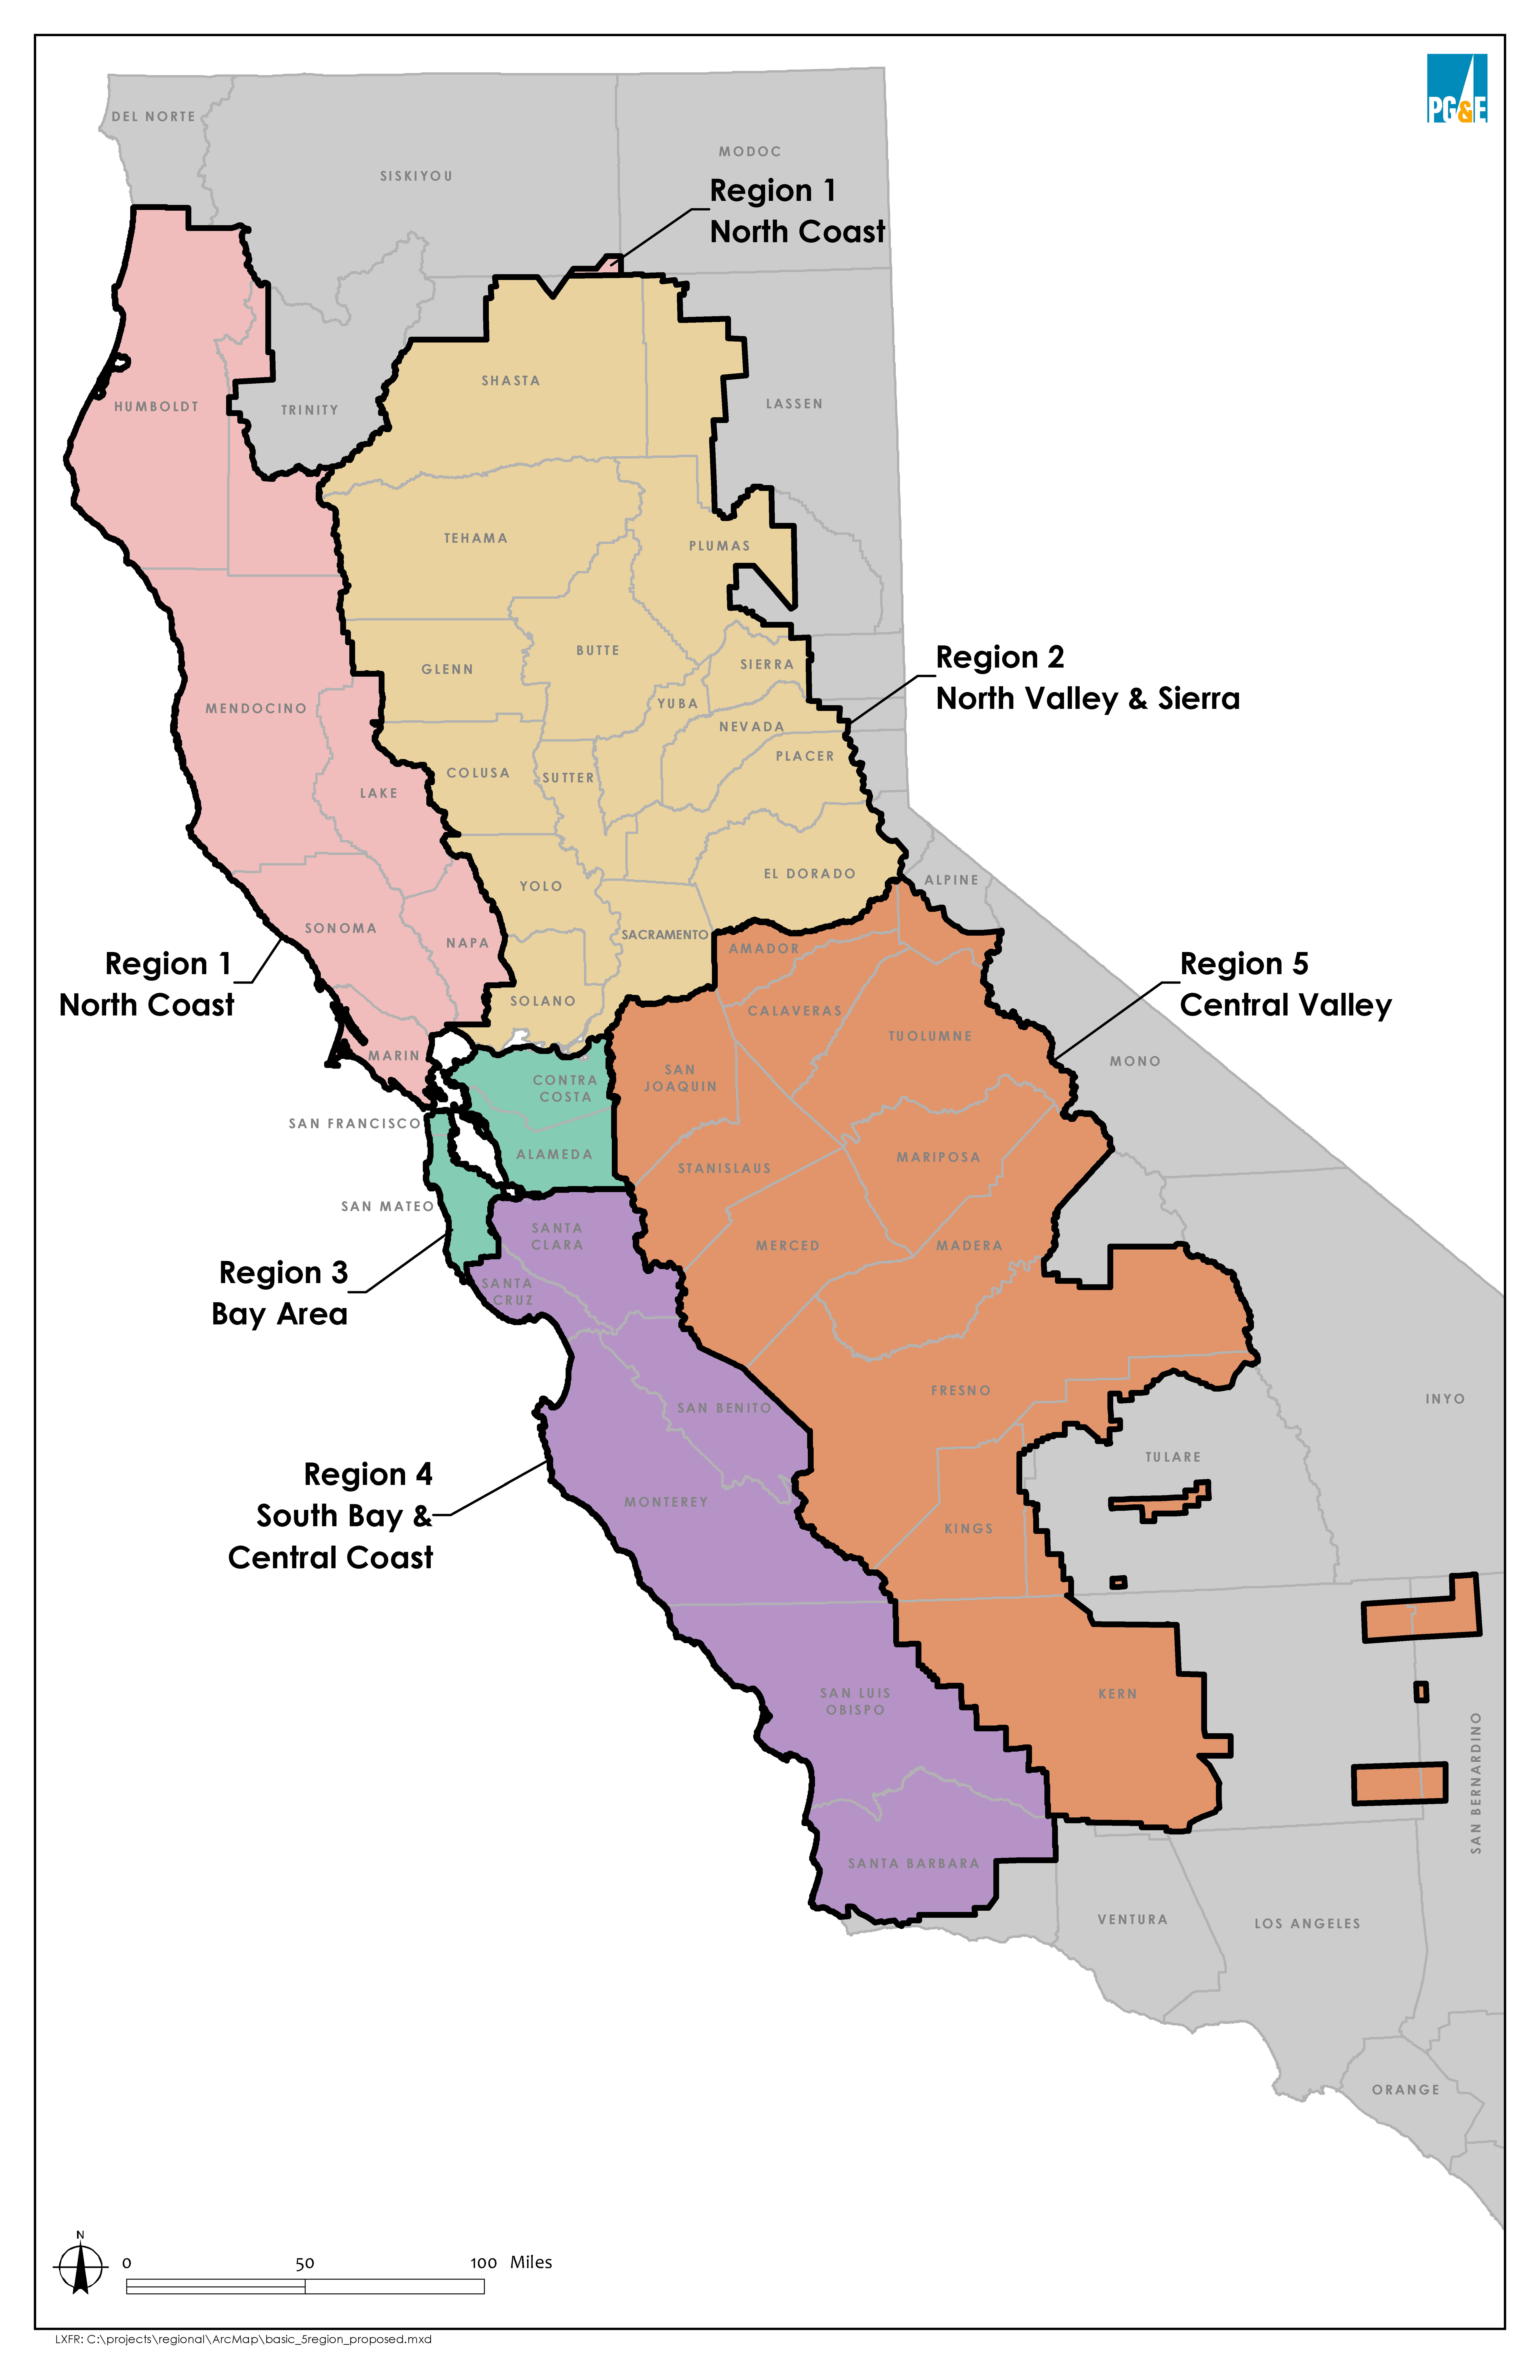 An Image of the PG&E Five Services Regions